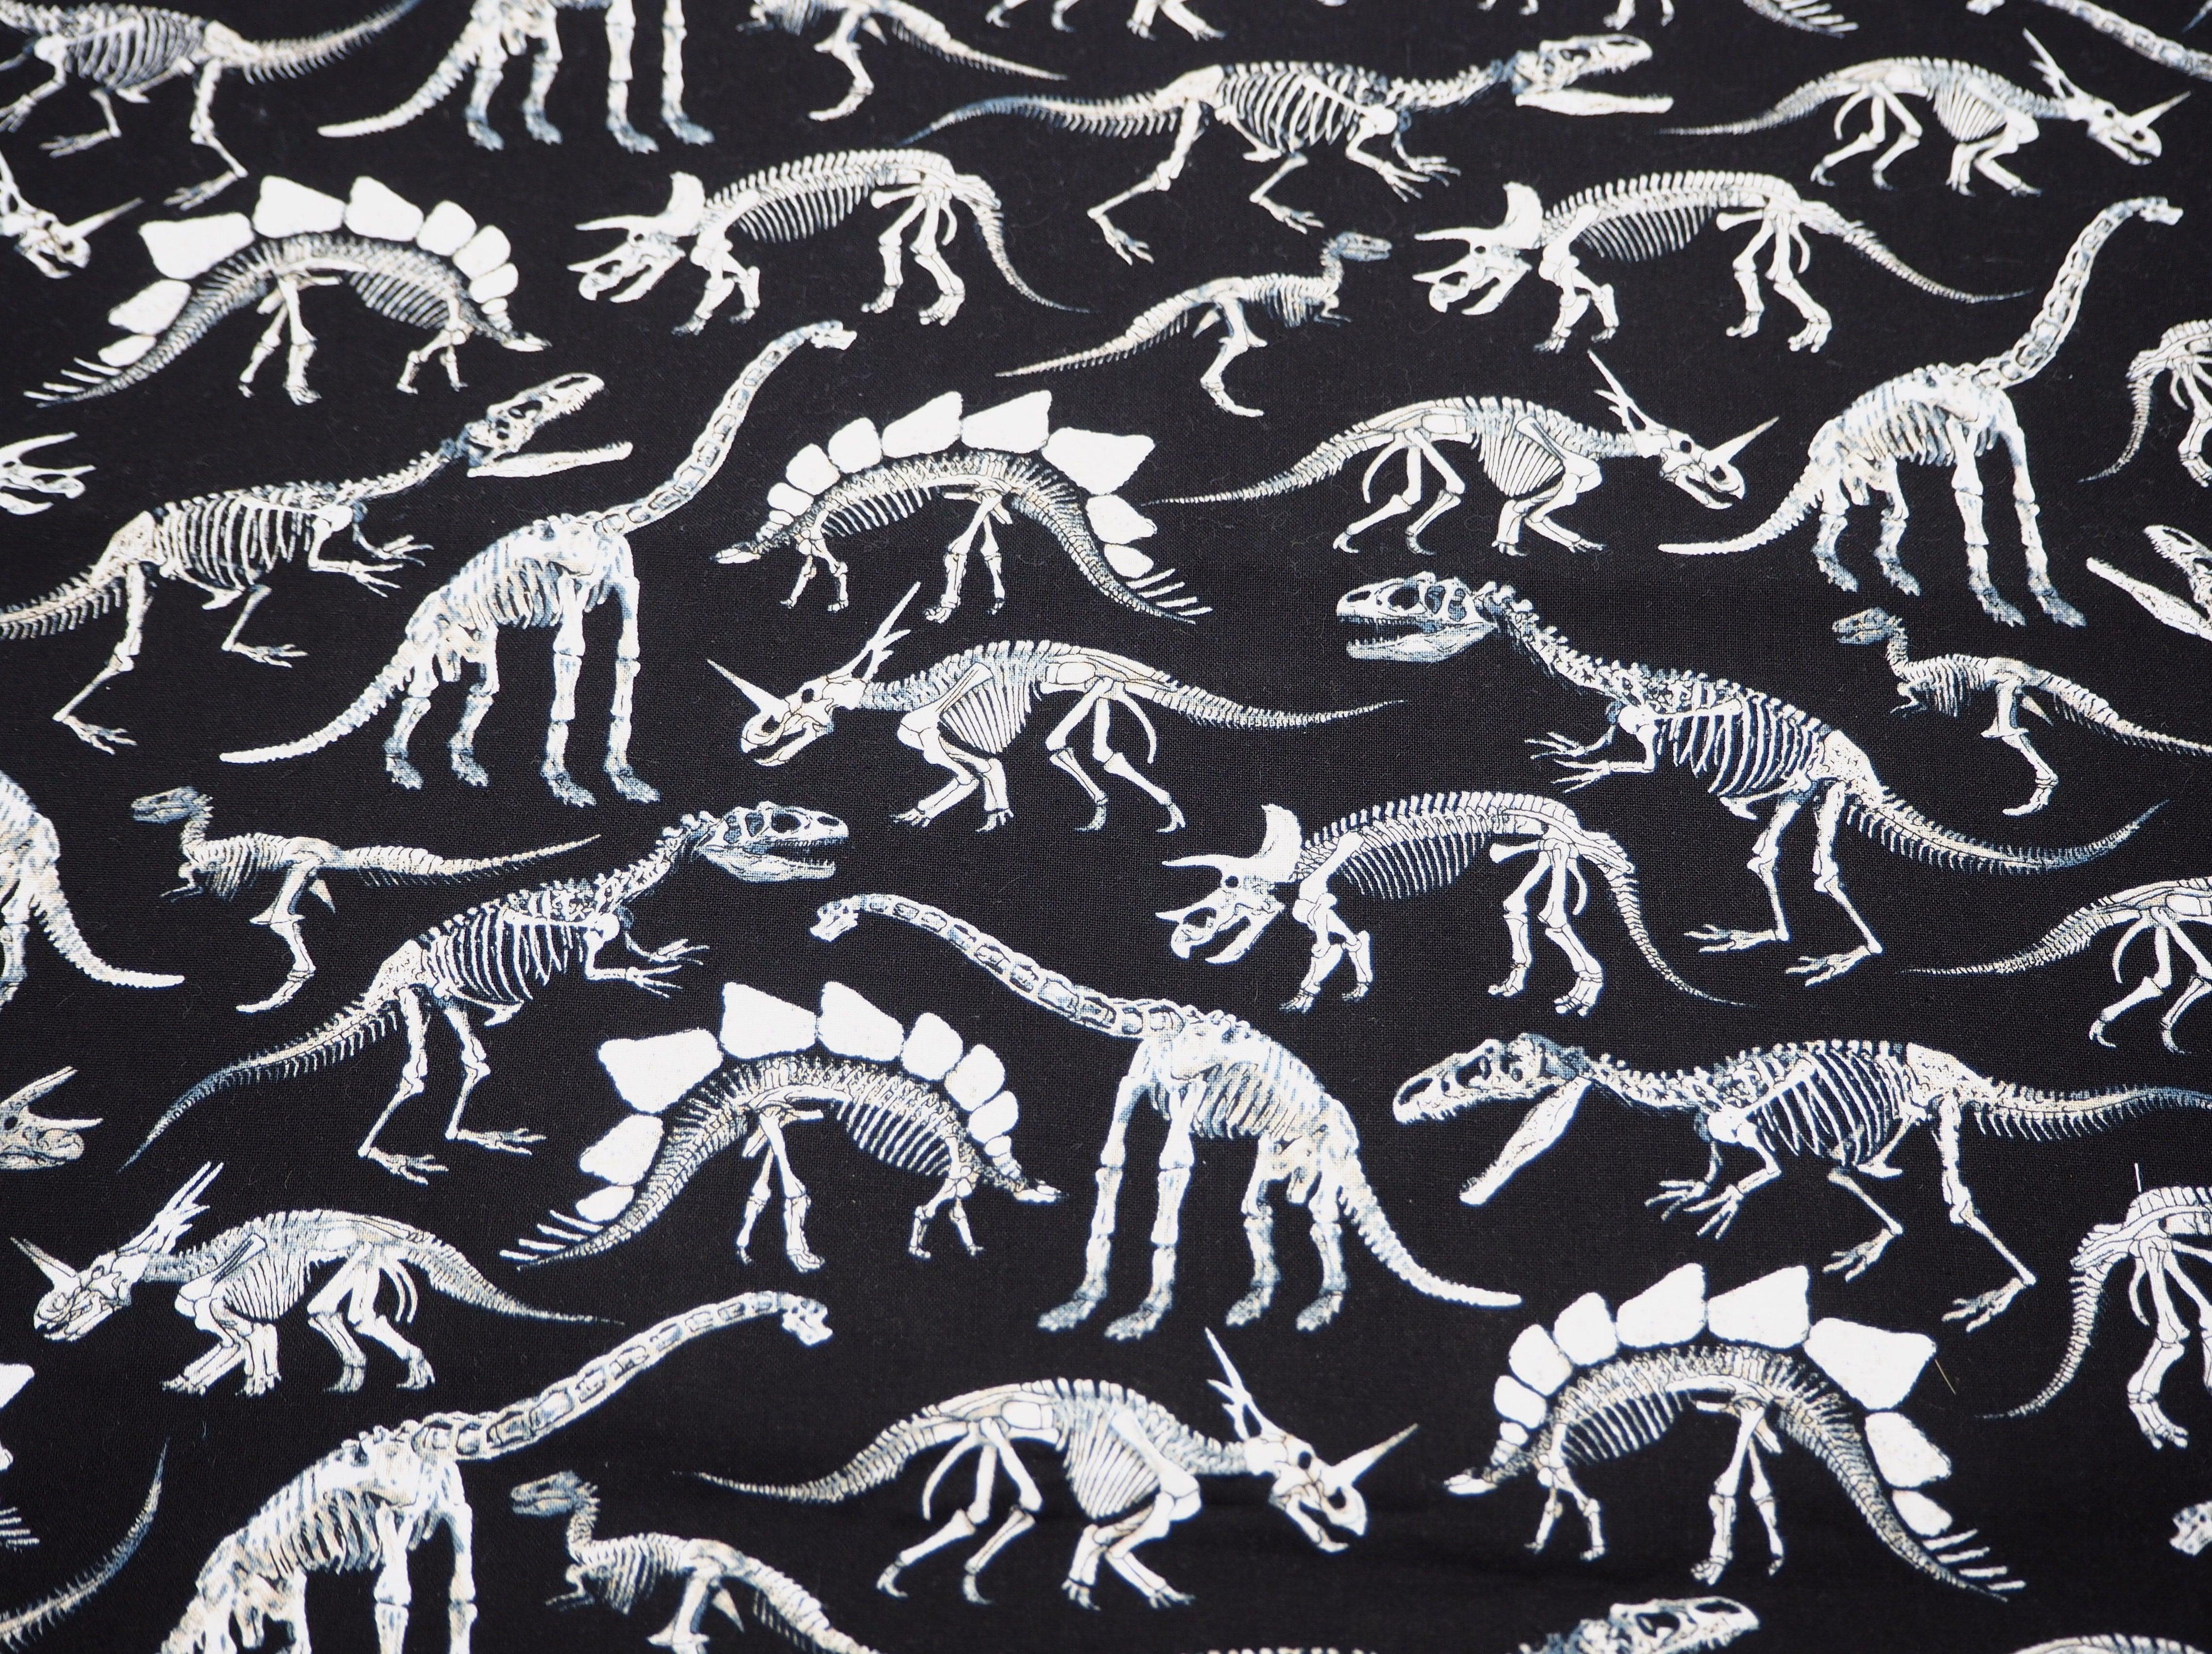 Fabric  view of A Sack Of Wheat, featuring black & white images of dinosaur skeletons on 100% cotton fabric